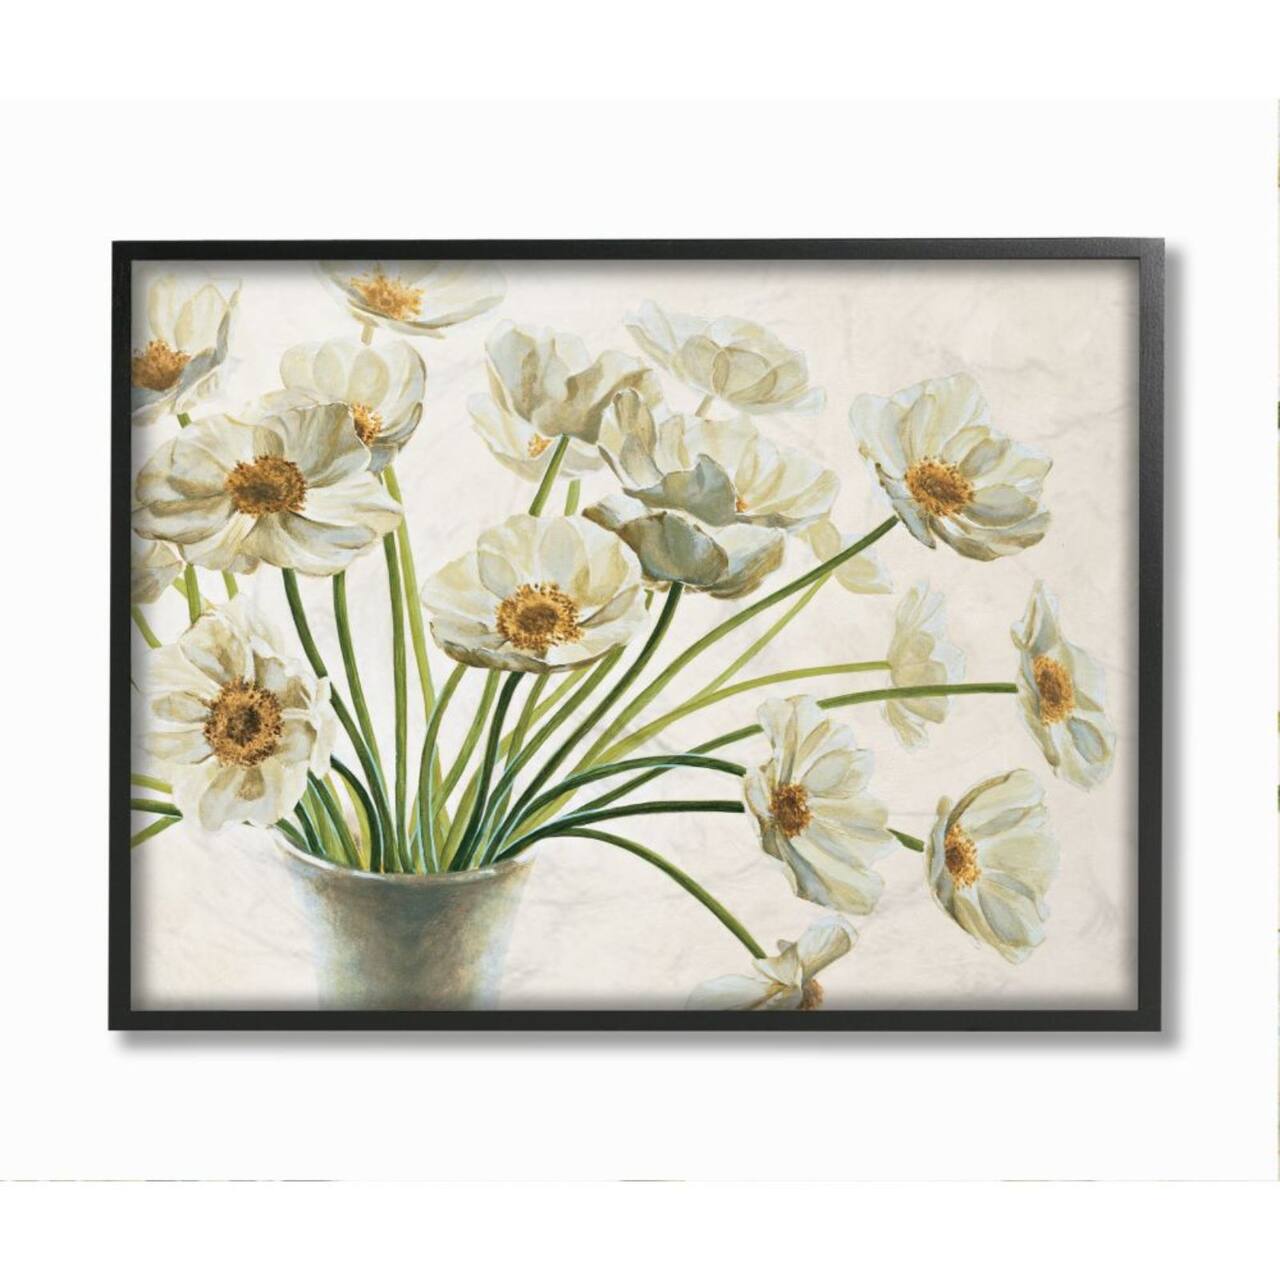 Stupell Industries Peaceful Poppies White Florals Black Framed Wall Art